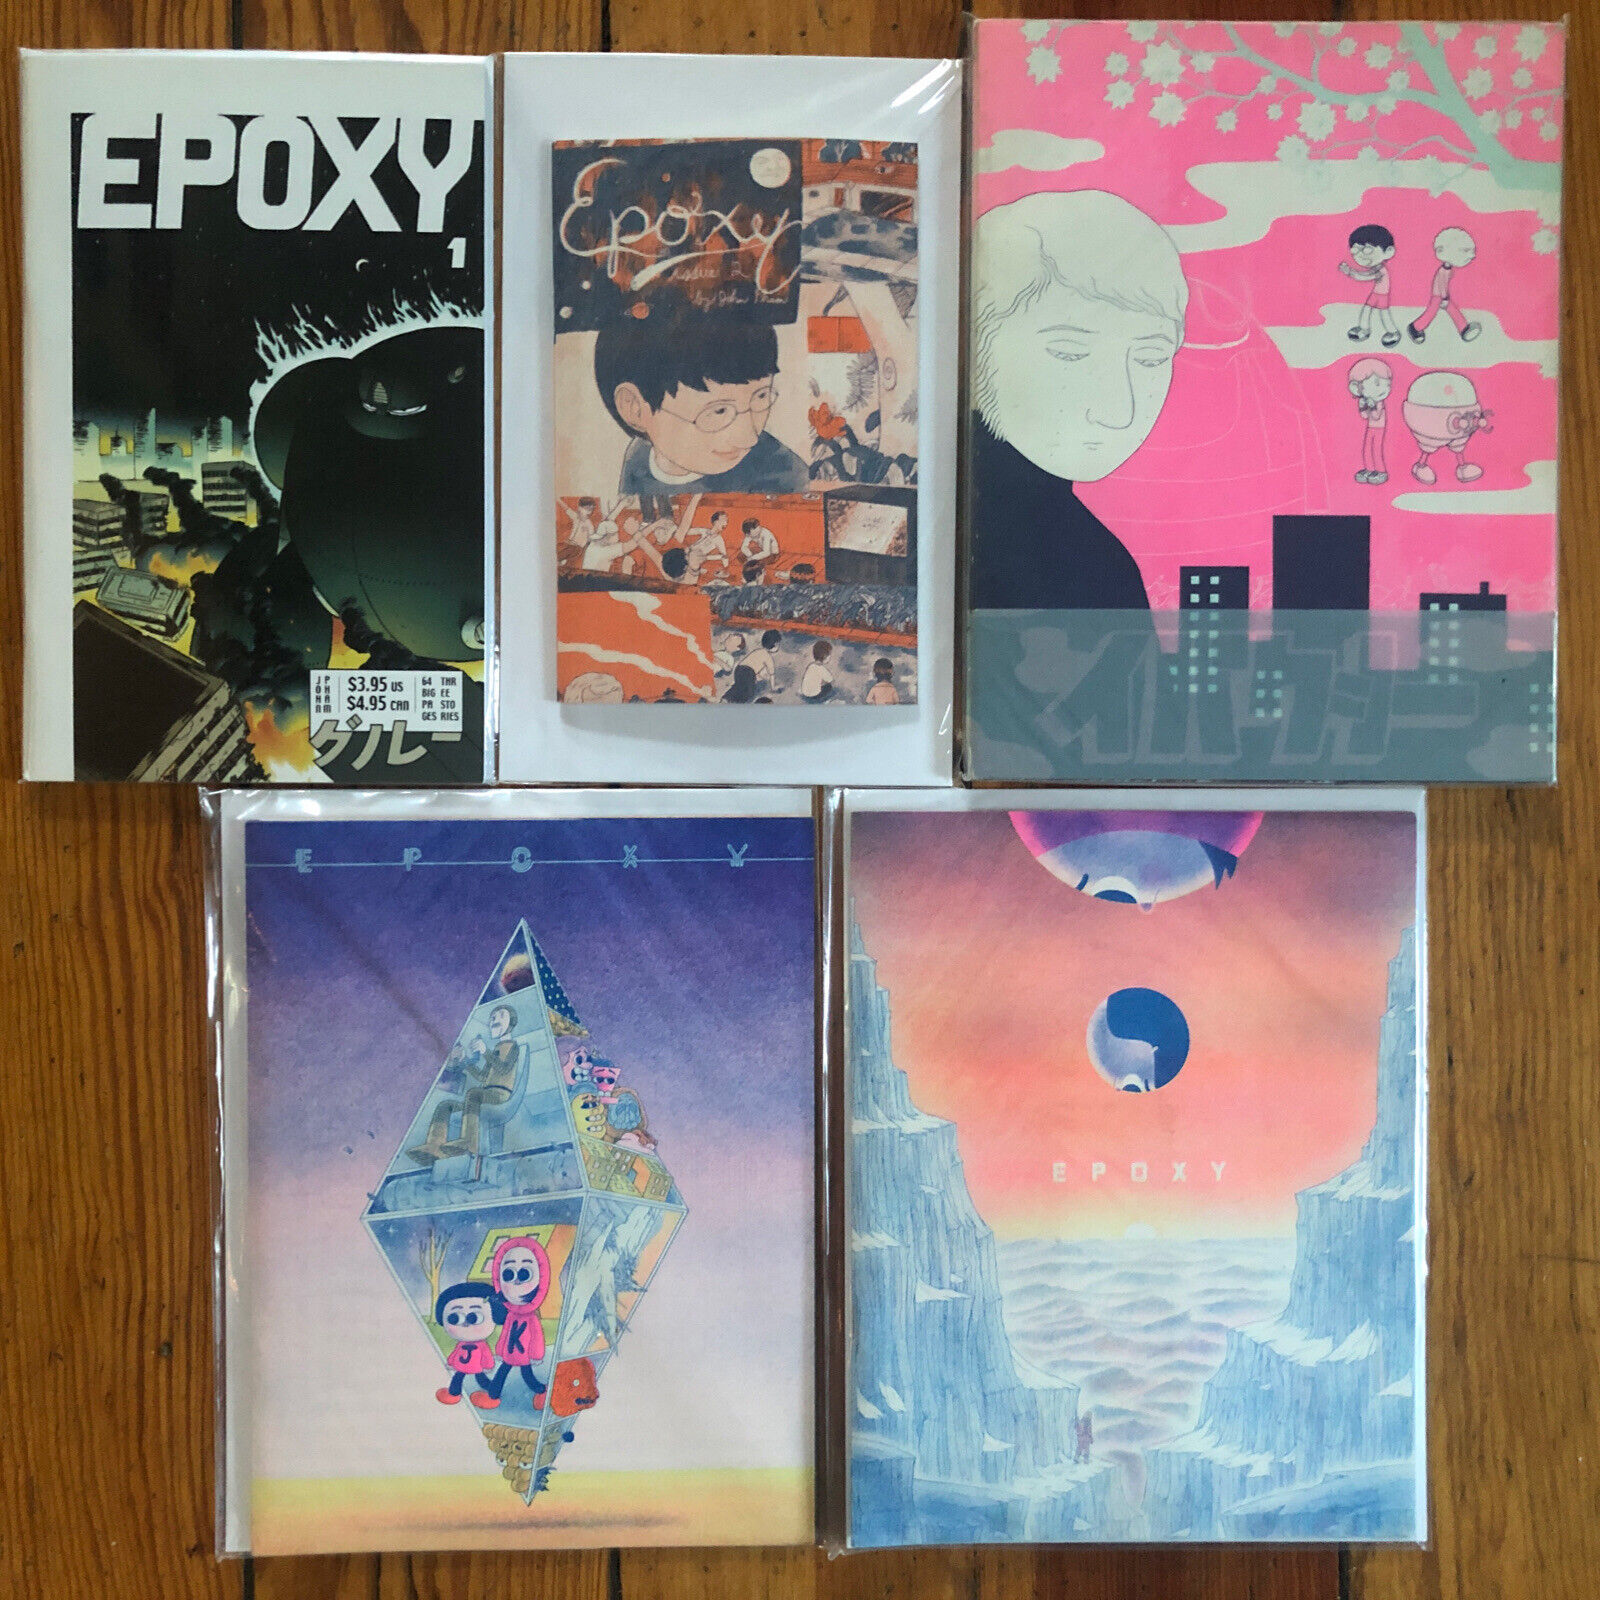 Epoxy 1 2 3 4 5 Handmade Comics by John Pham (#3 is FN/VF, others are NEW NM)